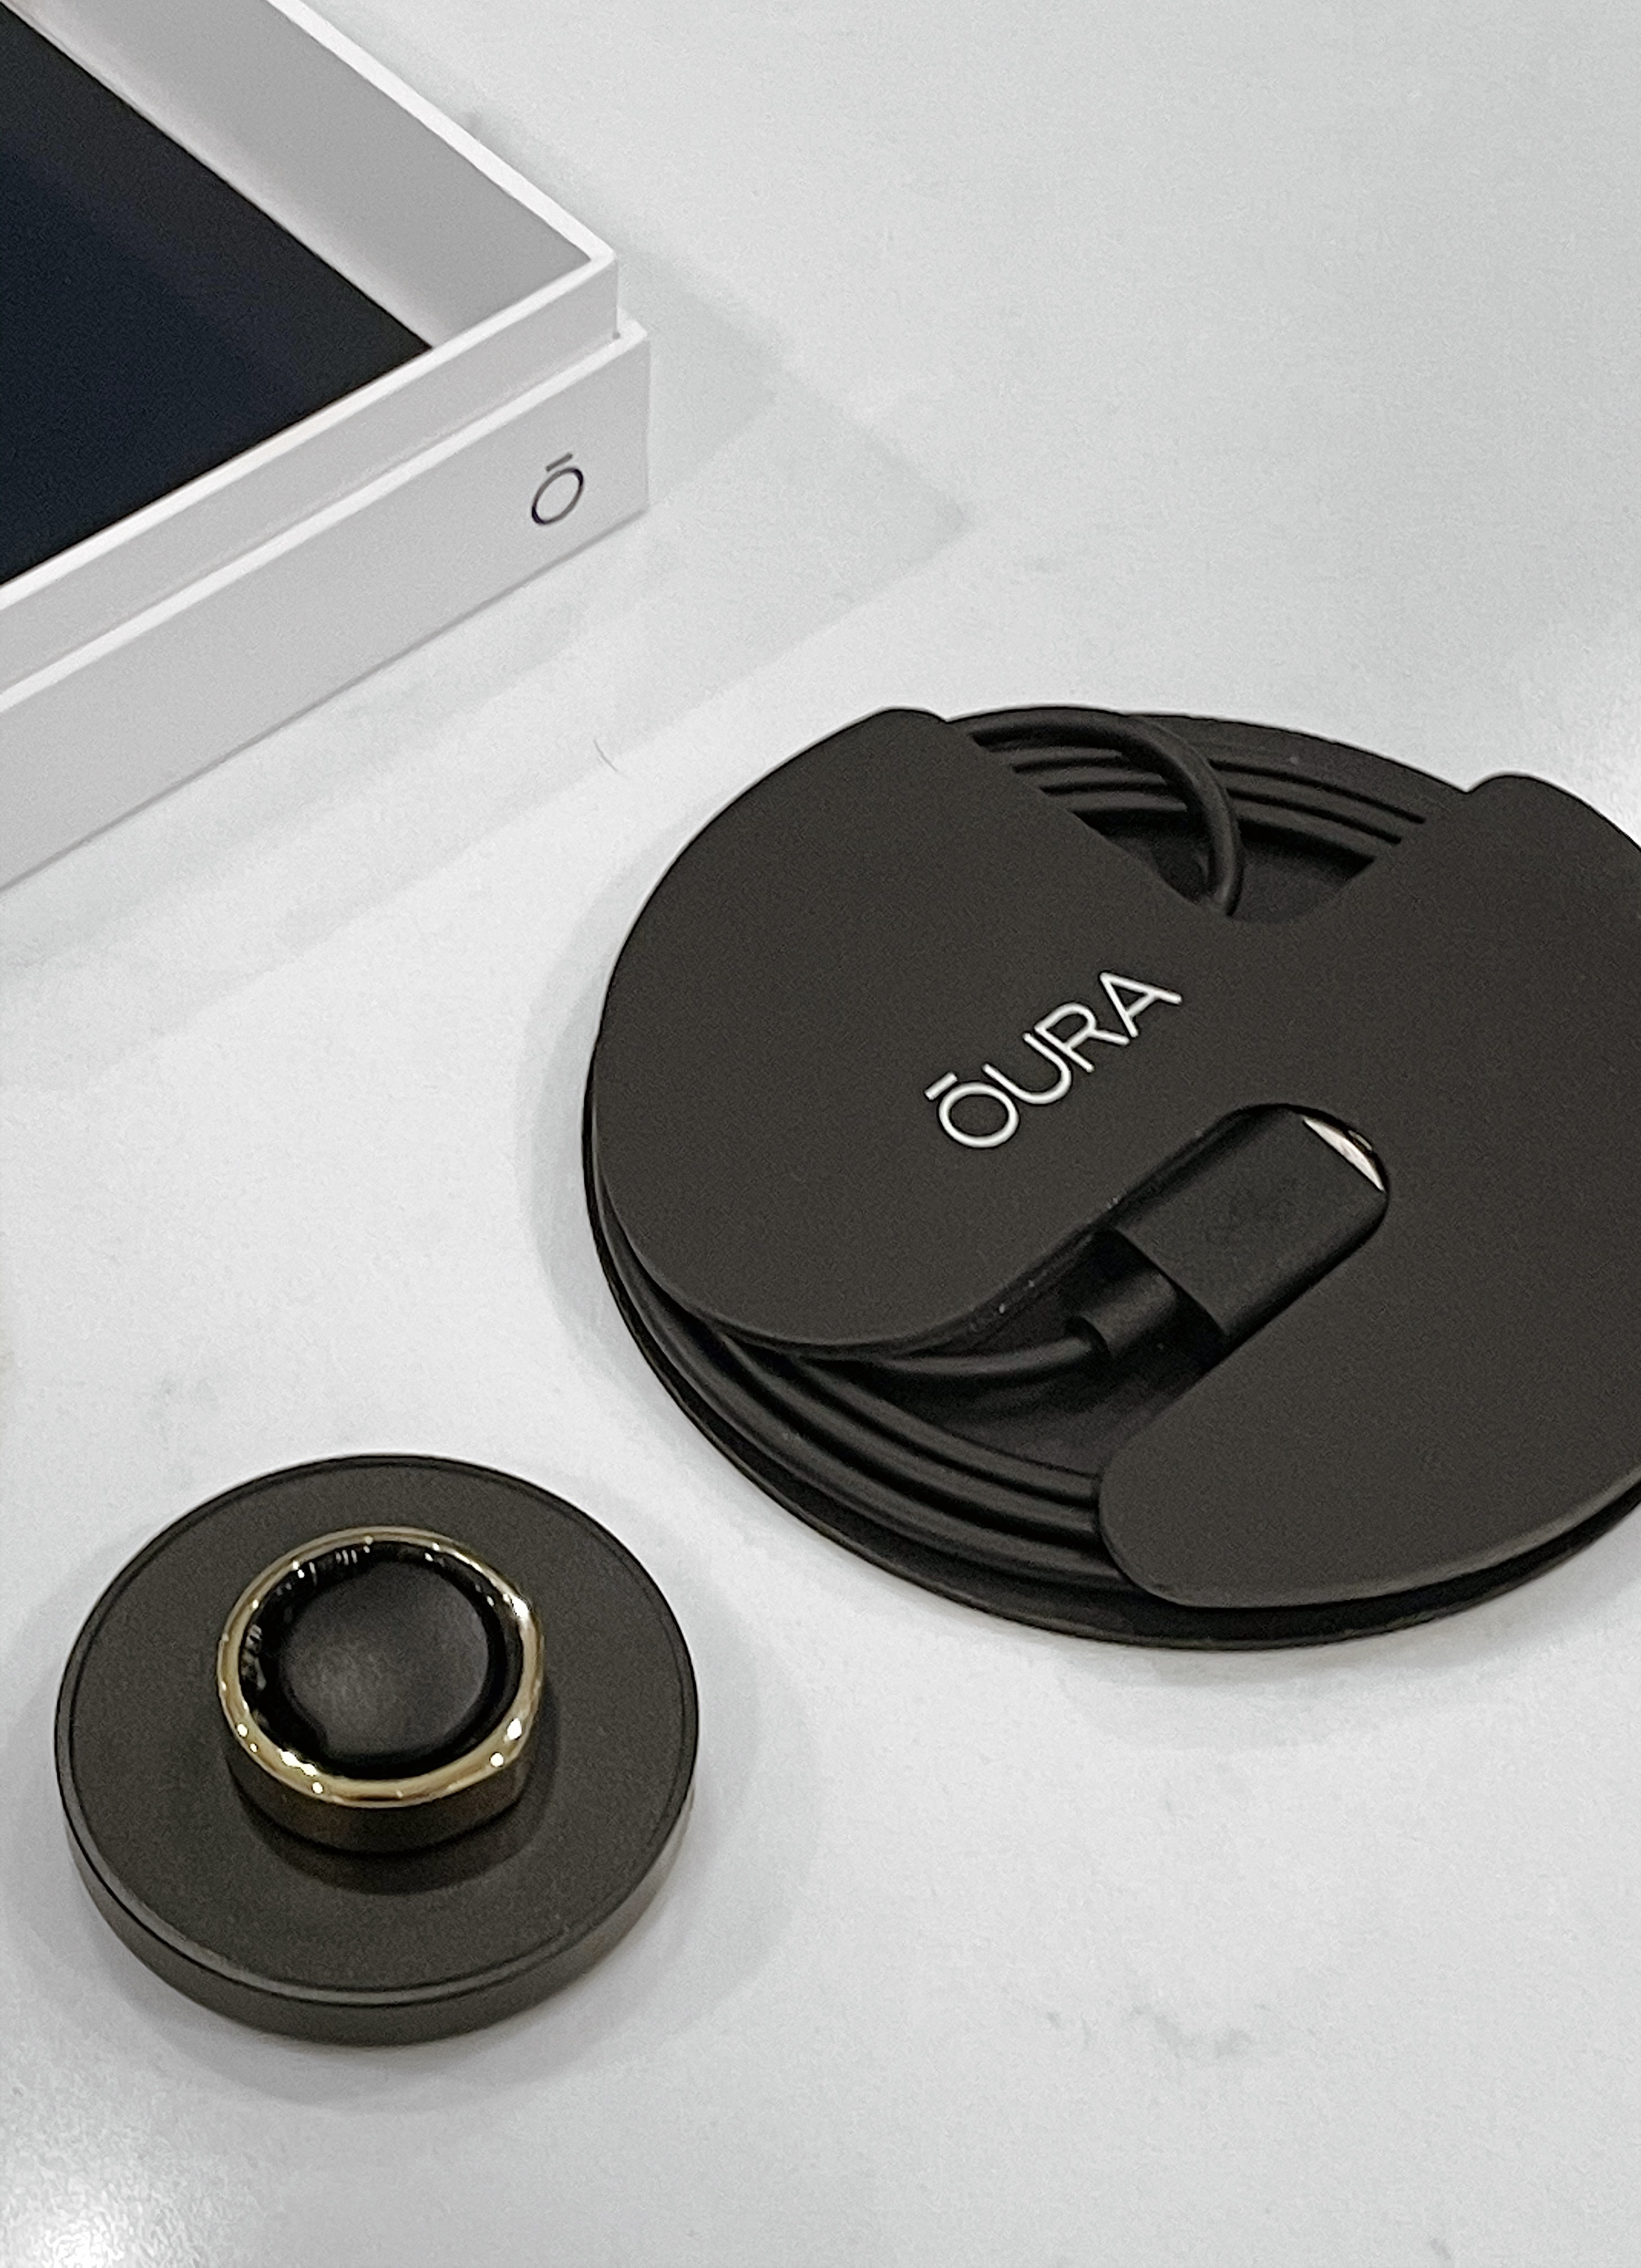 NEW: Oura Ring Version 3 Sizing Kit First Impressions & Unboxing